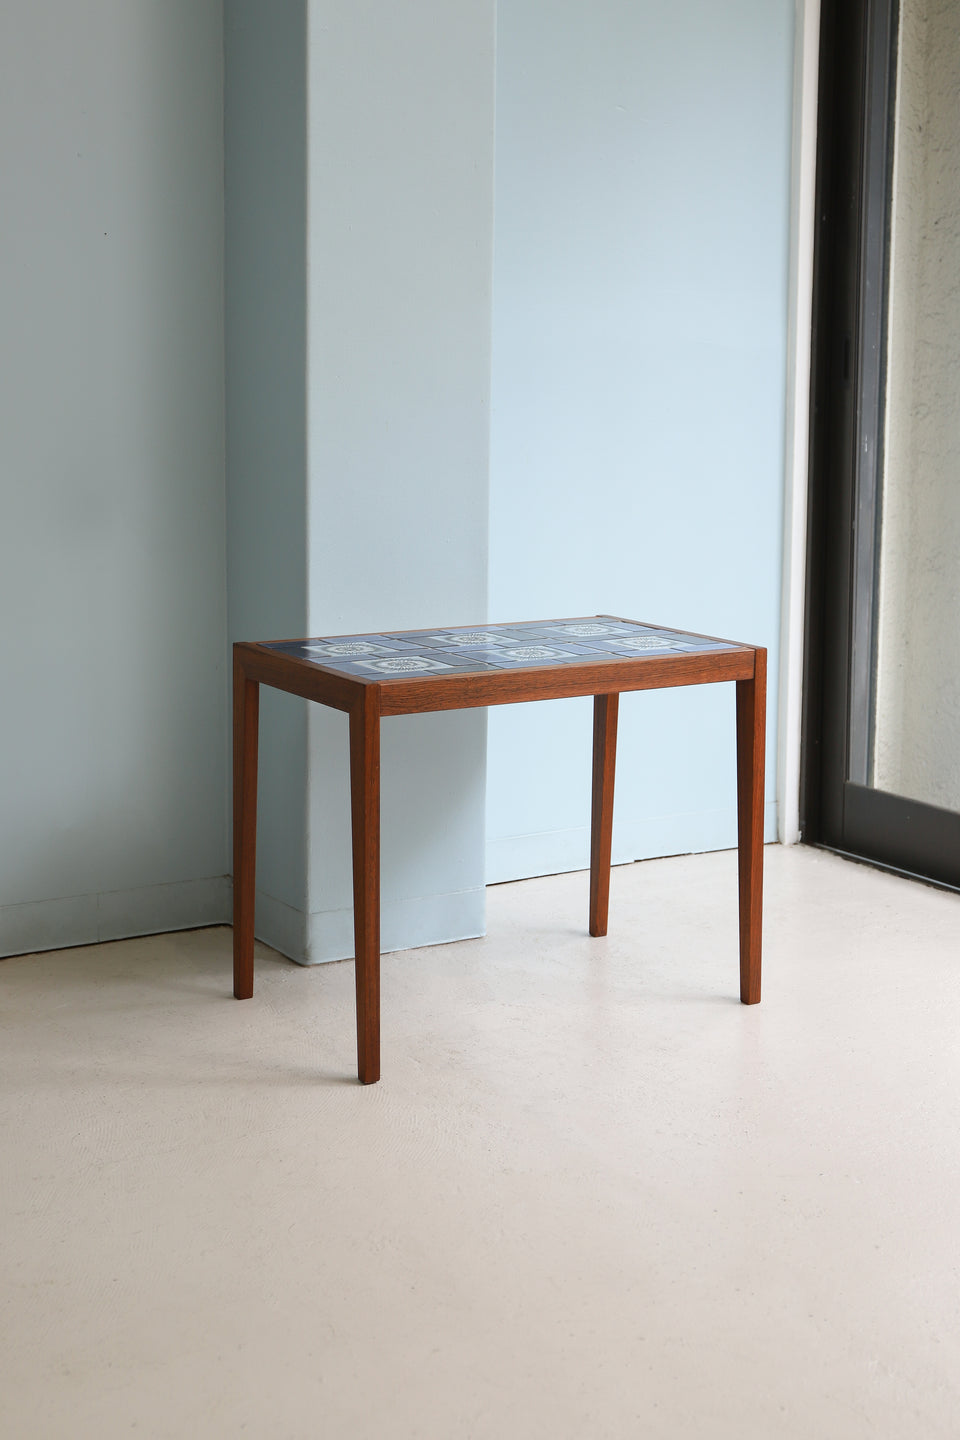 Danish Vintage Side Table Rosewood with Ceramic Tile/デンマークヴィンテージ サイドテーブル ローズウッド タイルトップ 北欧家具